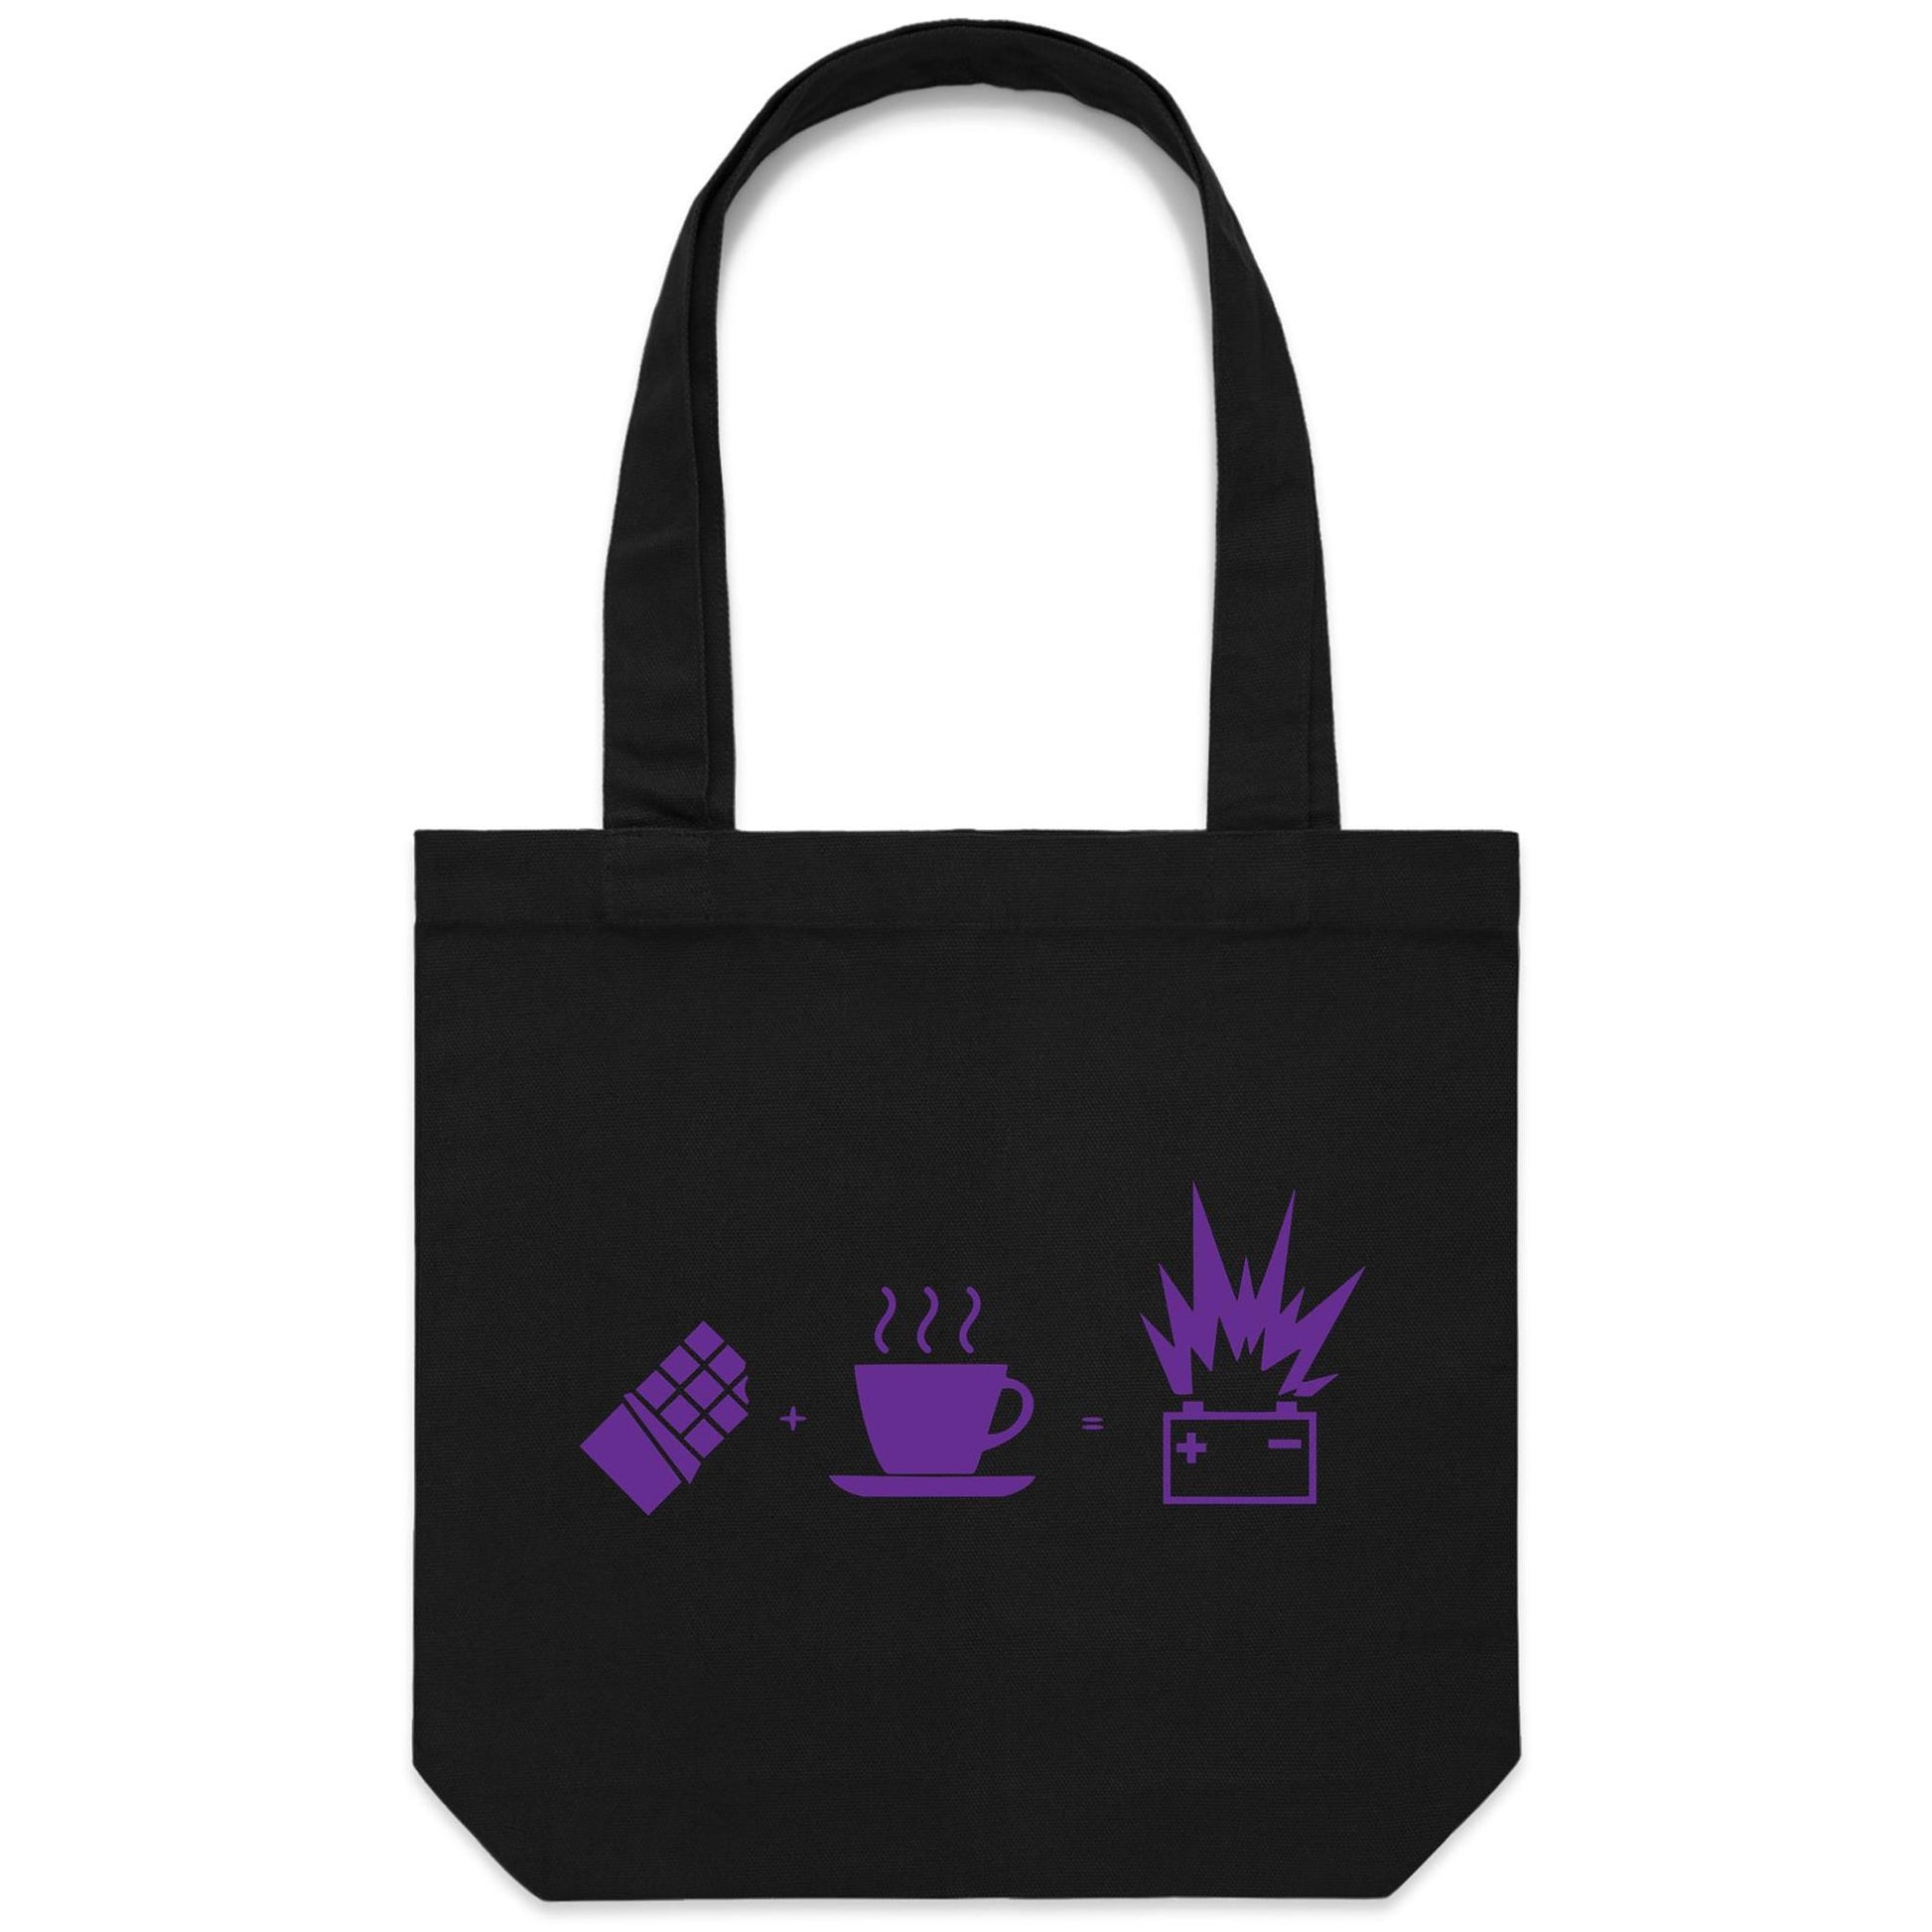 Chocolate + Coffee = Energy - Canvas Tote Bag Black One-Size Tote Bag Coffee